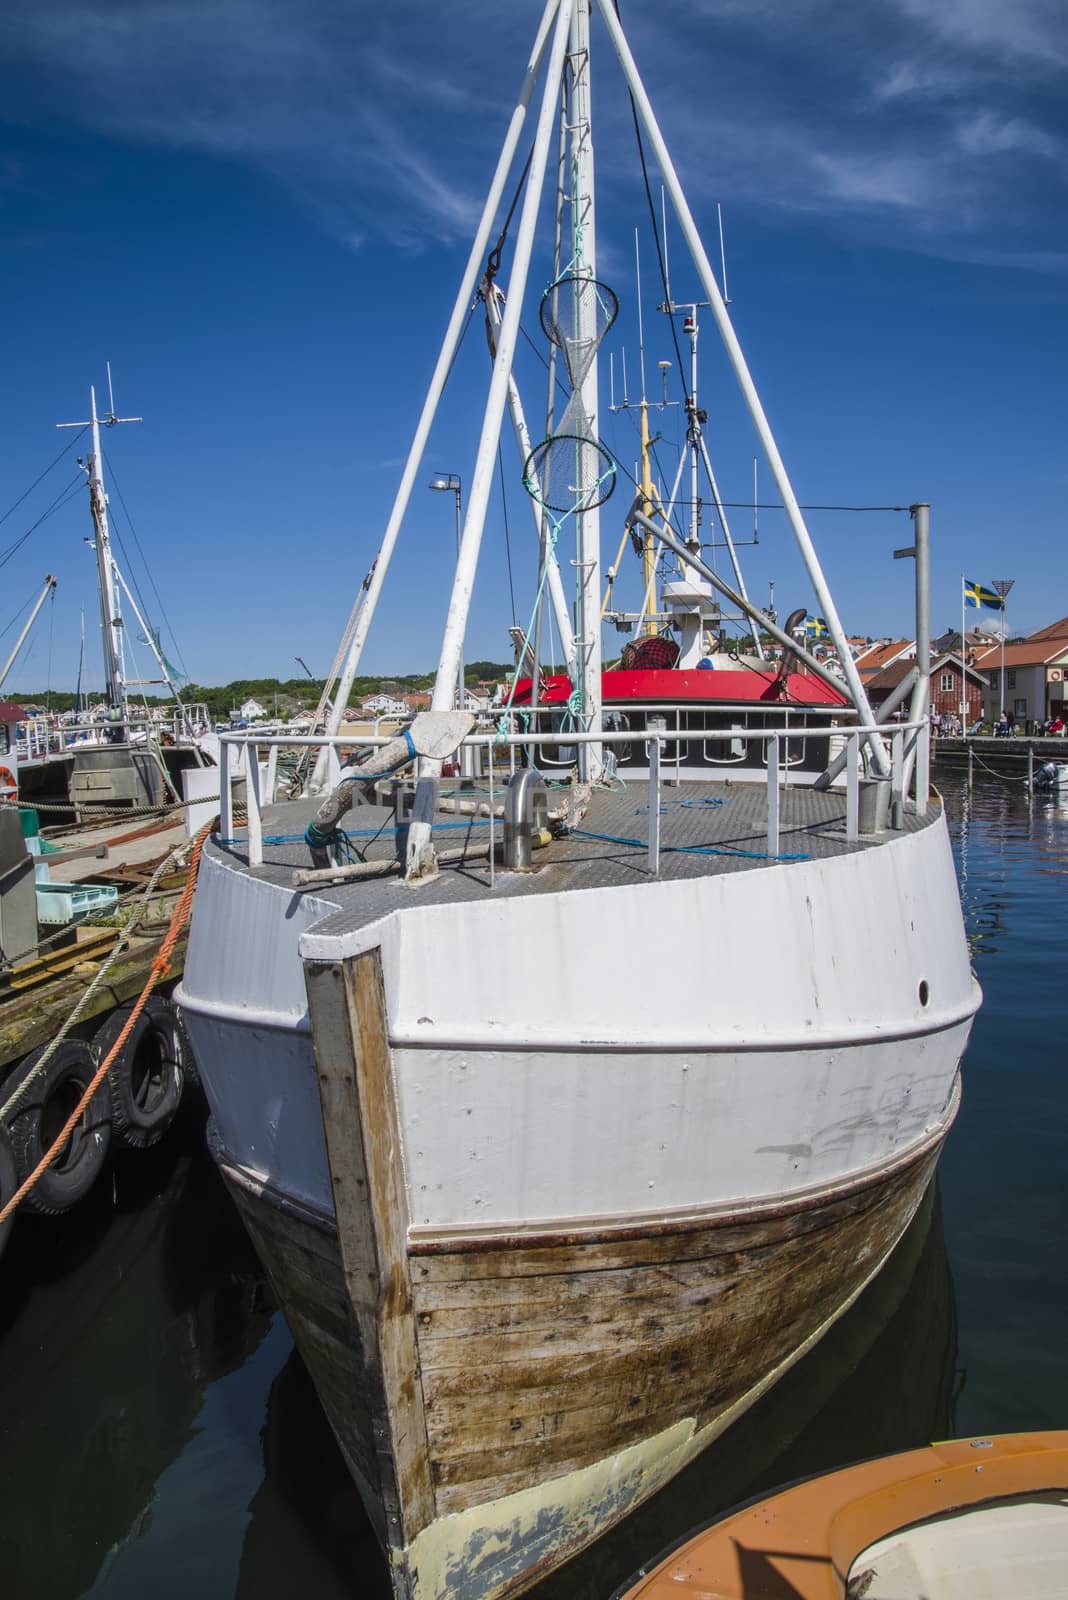 The fishing boats is moored to the docks in Grebbestad, Sweden.